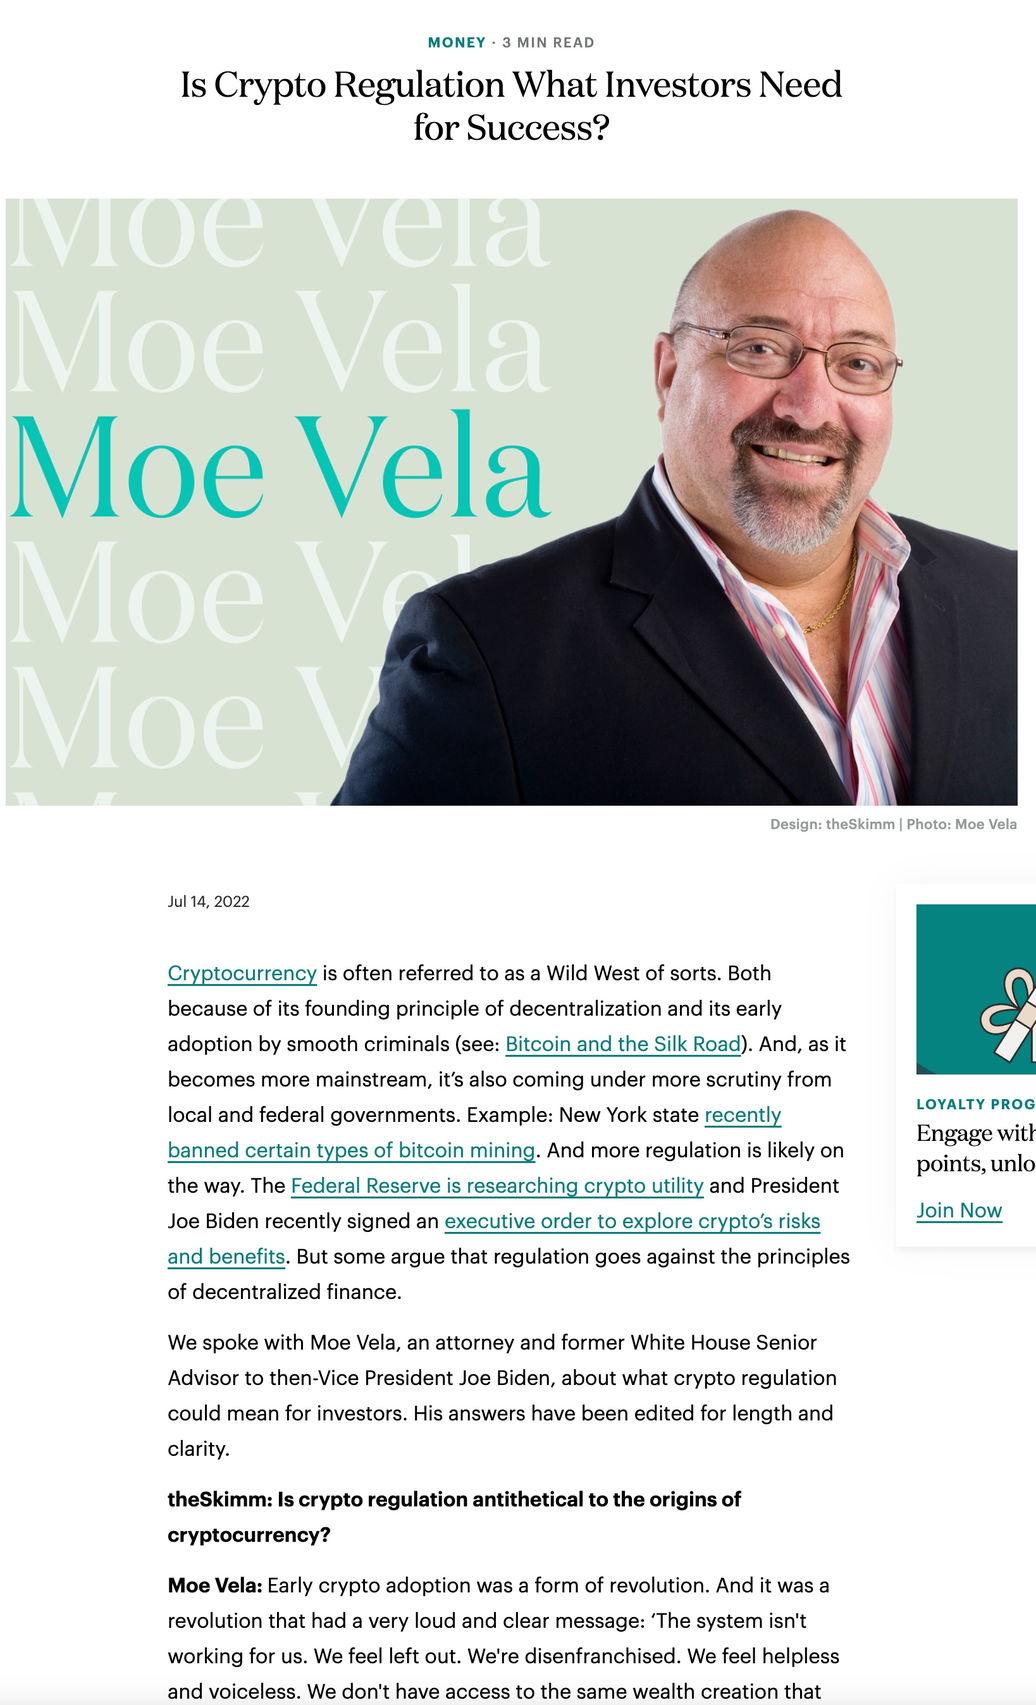 New interview with Moe Vela